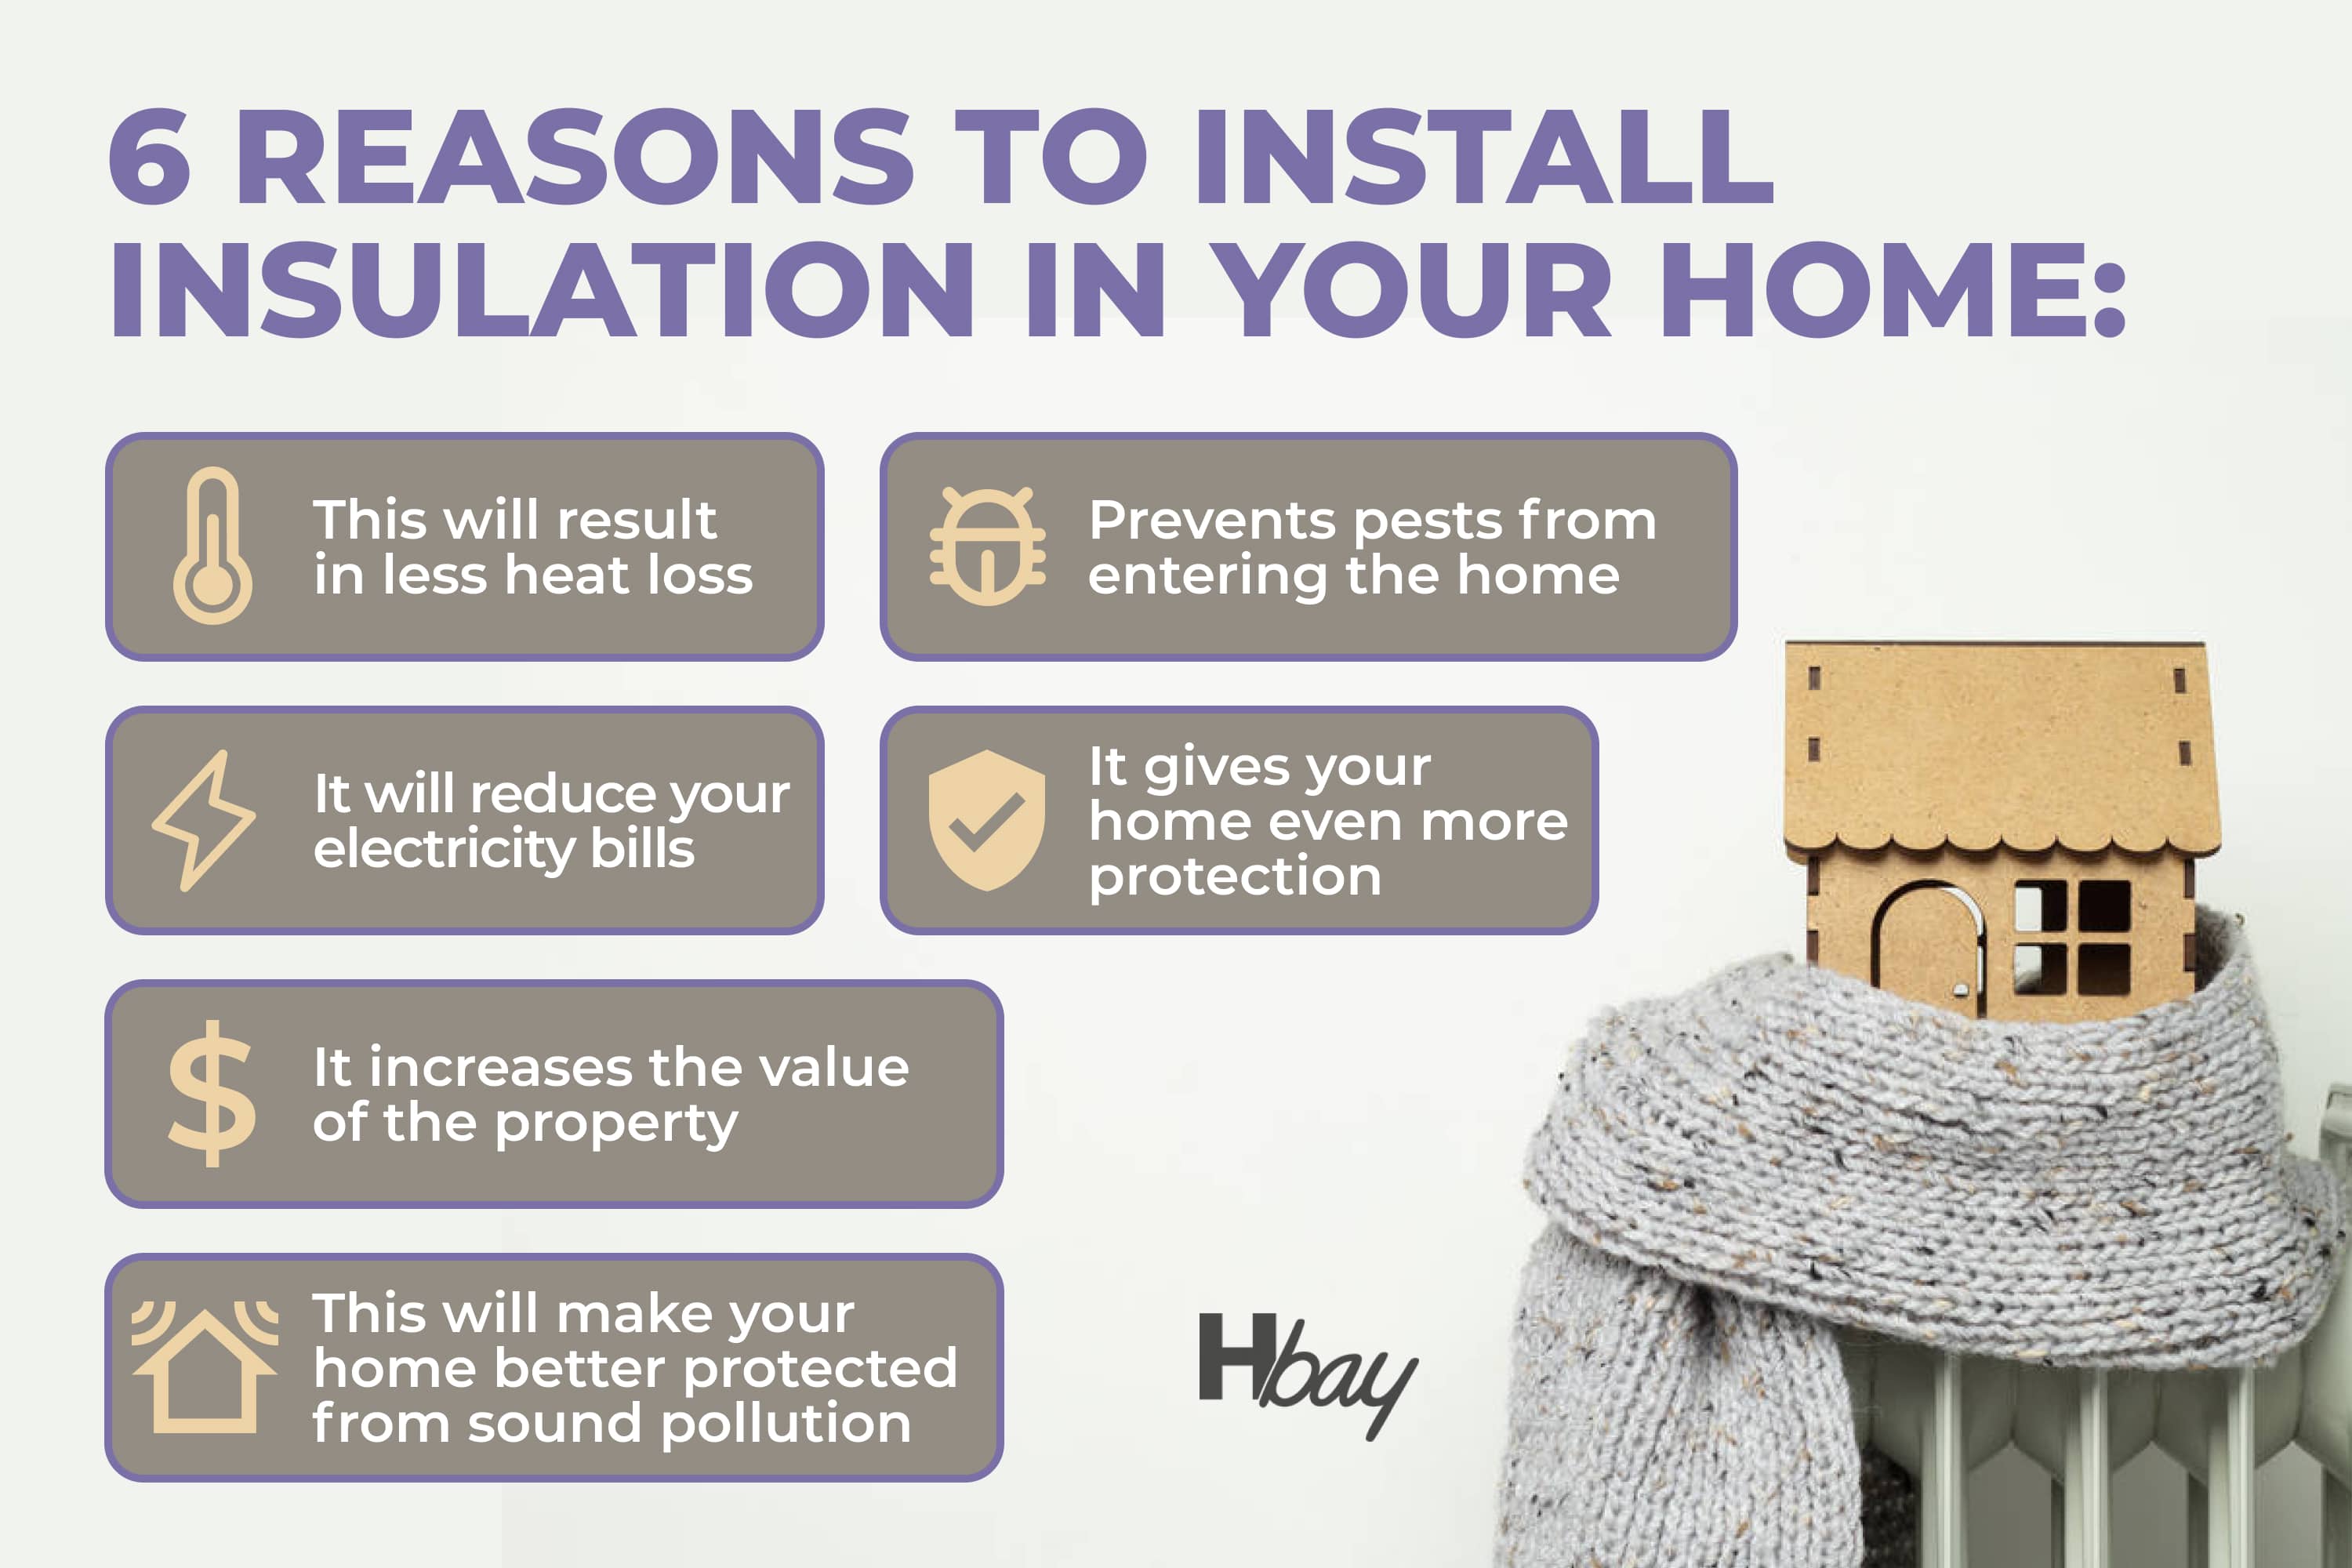 6 reasons to install insulation in your home